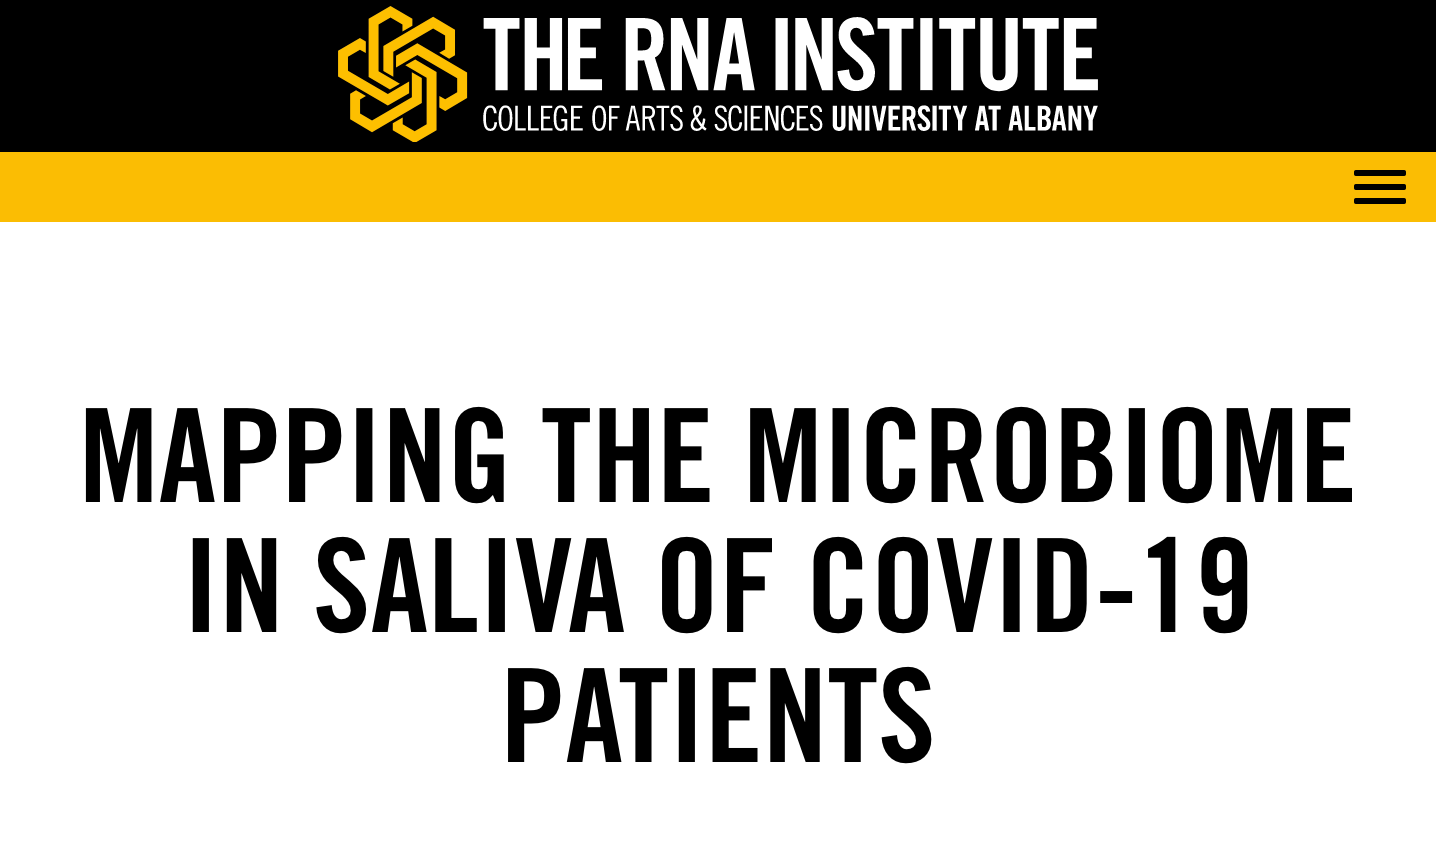 RNA Institute of Albany Microbiome - COVID News